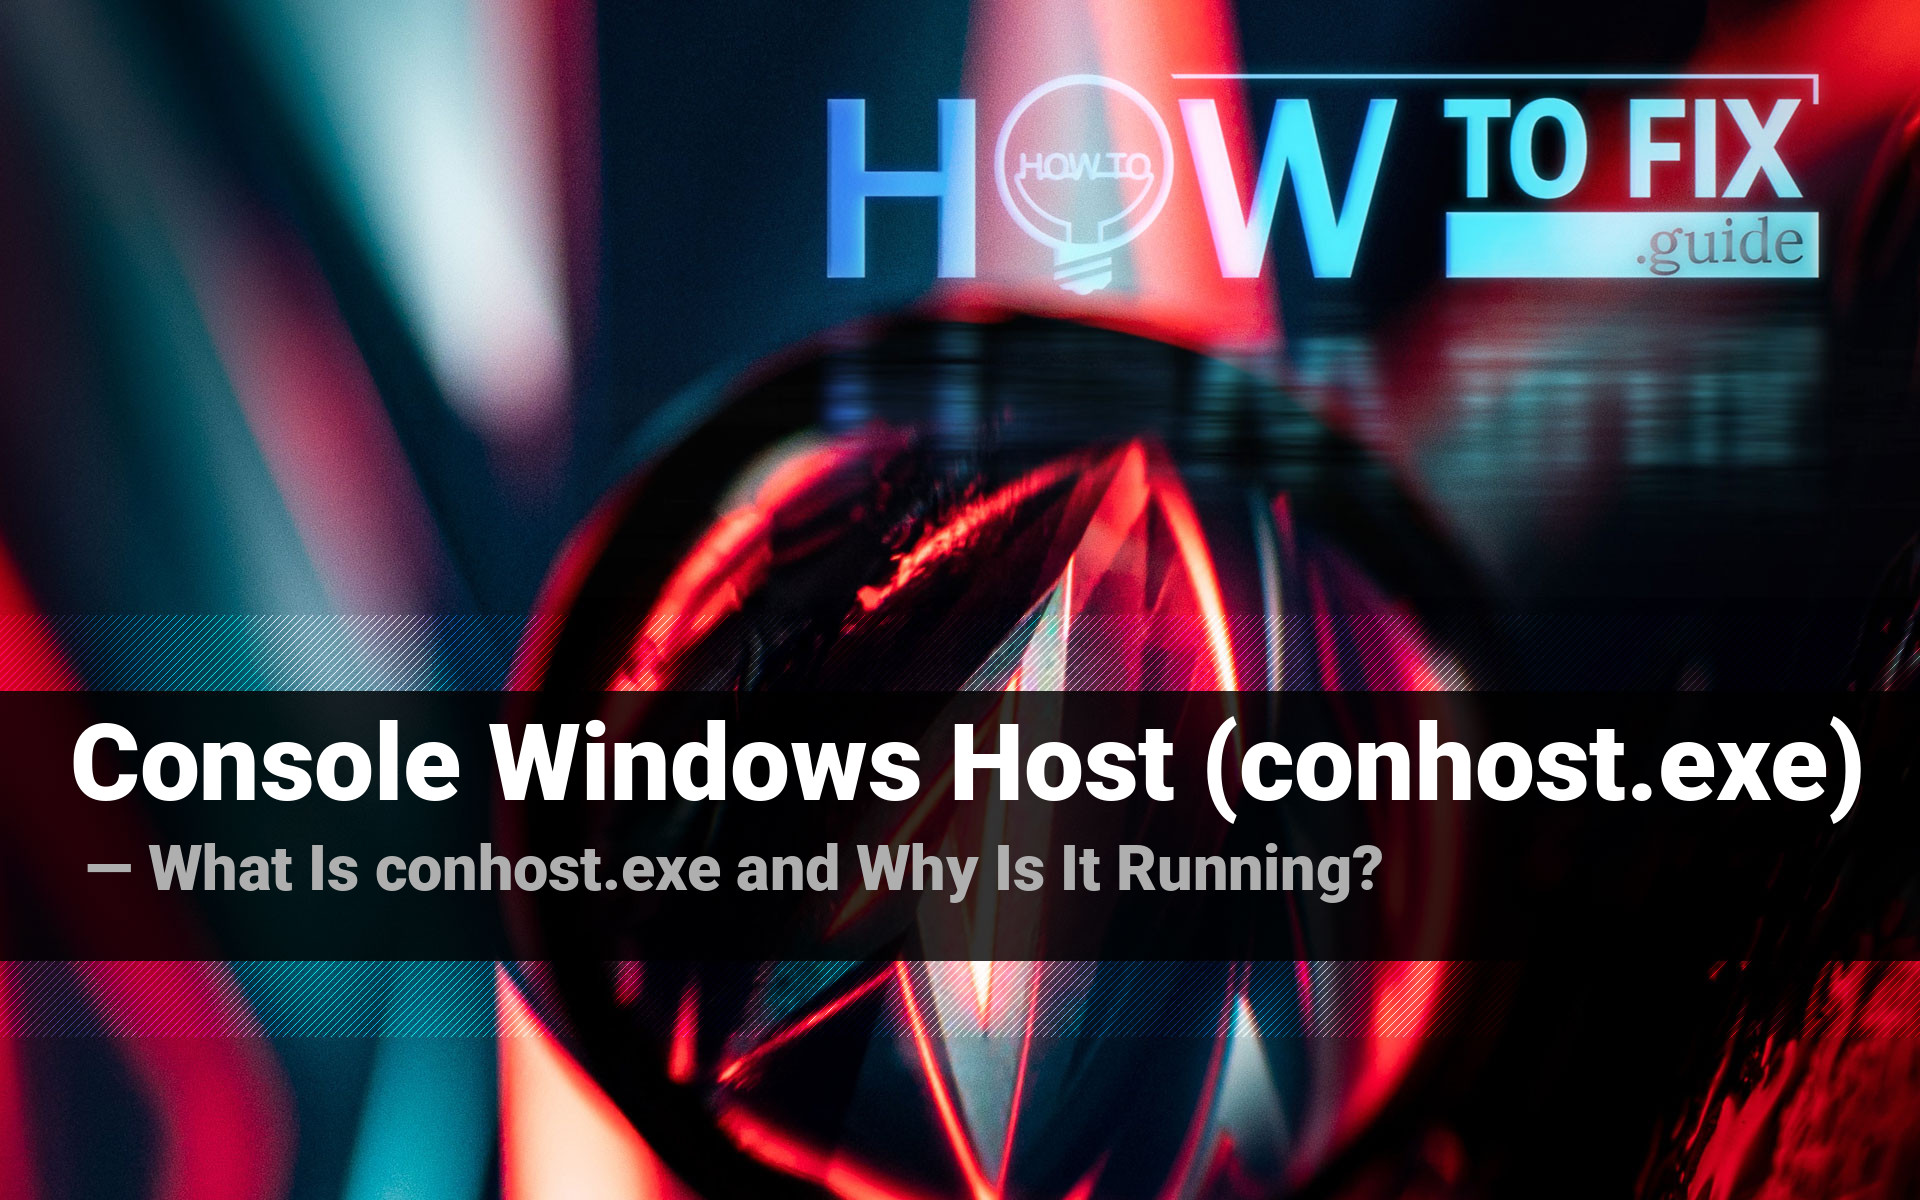 Console Windows Host process (conhost.exe) - why is it running?